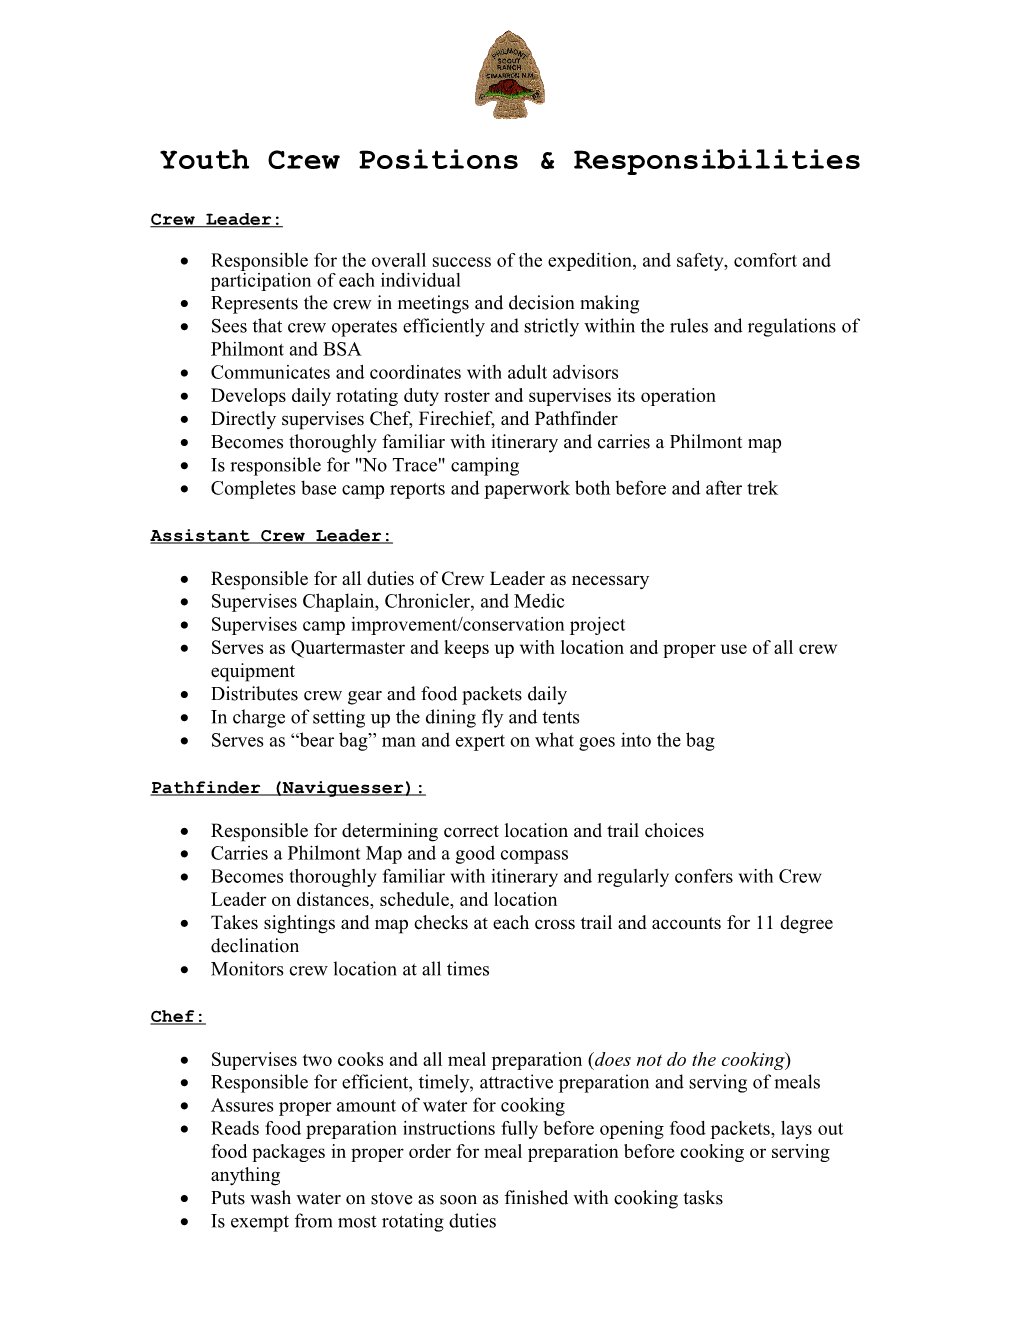 Youth Crew Positions & Responsibilities